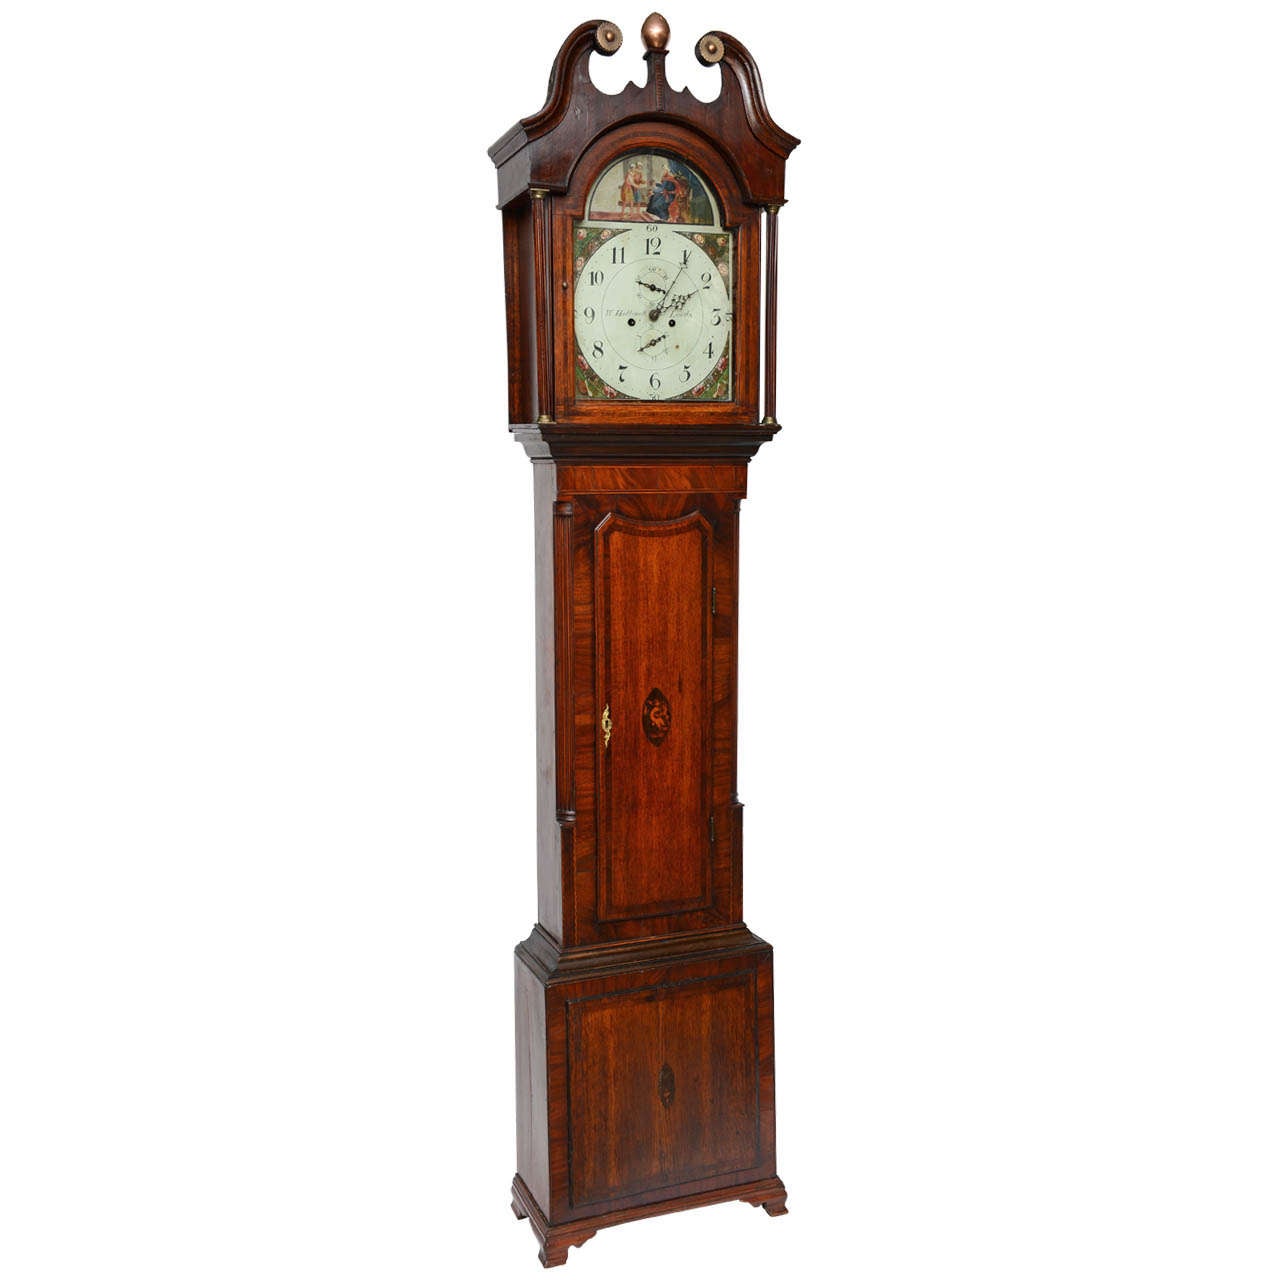 English Tall Case/ Grandfather Clock, Early 1800s